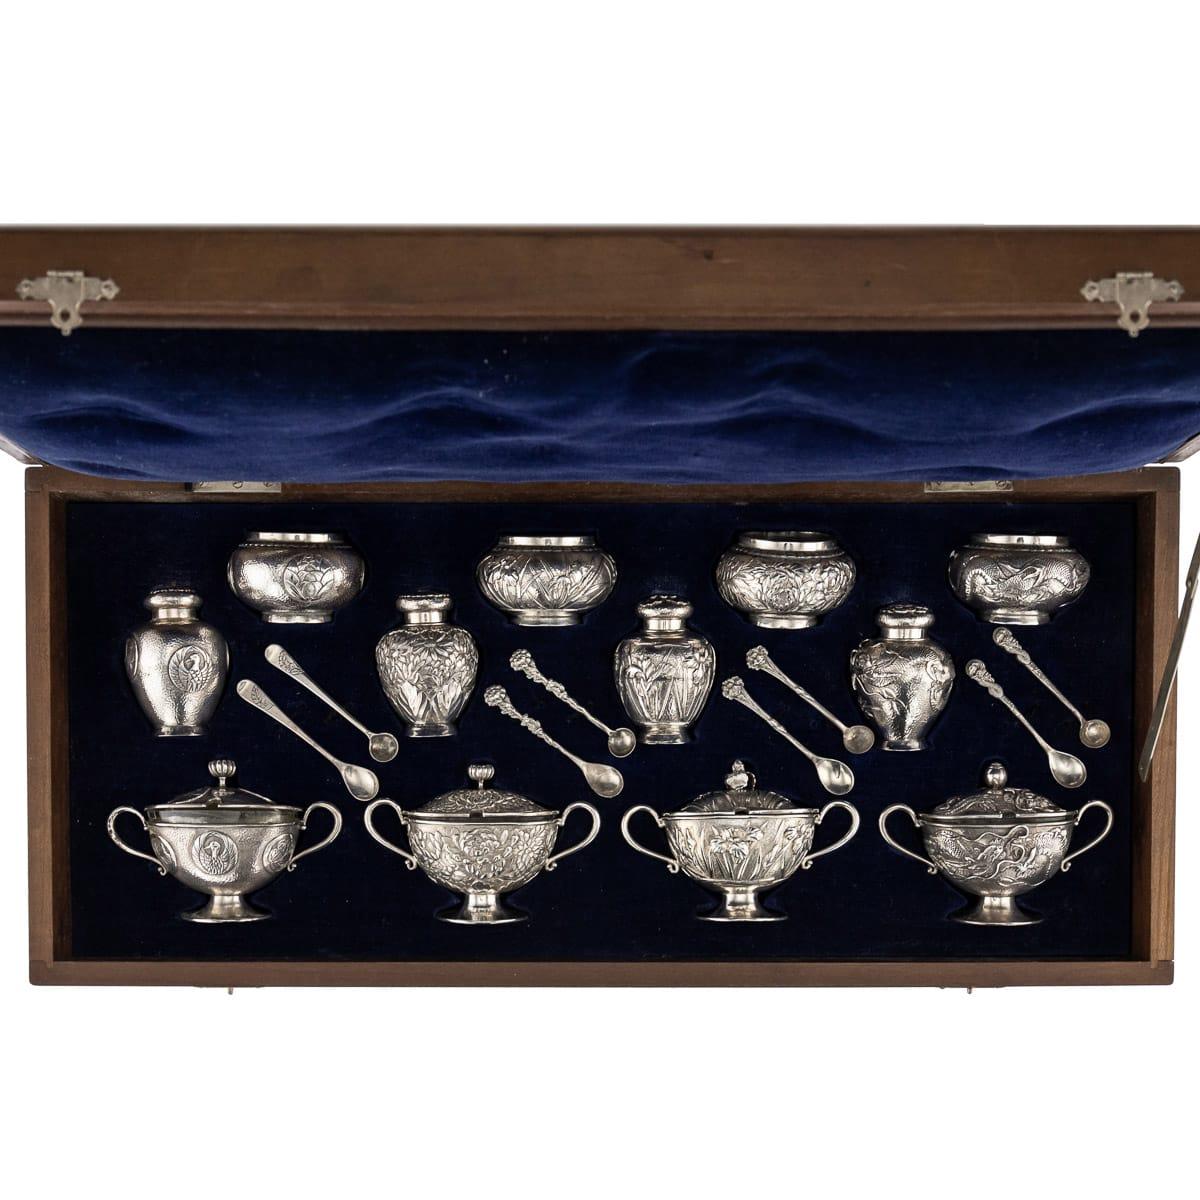 Antique early 20th century Japanese Meiji period solid silver large condiment set. Consisting of four mustard pots with spoons, salt cellars with spoons and pepper shakers, exceptional and magnificent quality, chased and embossed with compressed